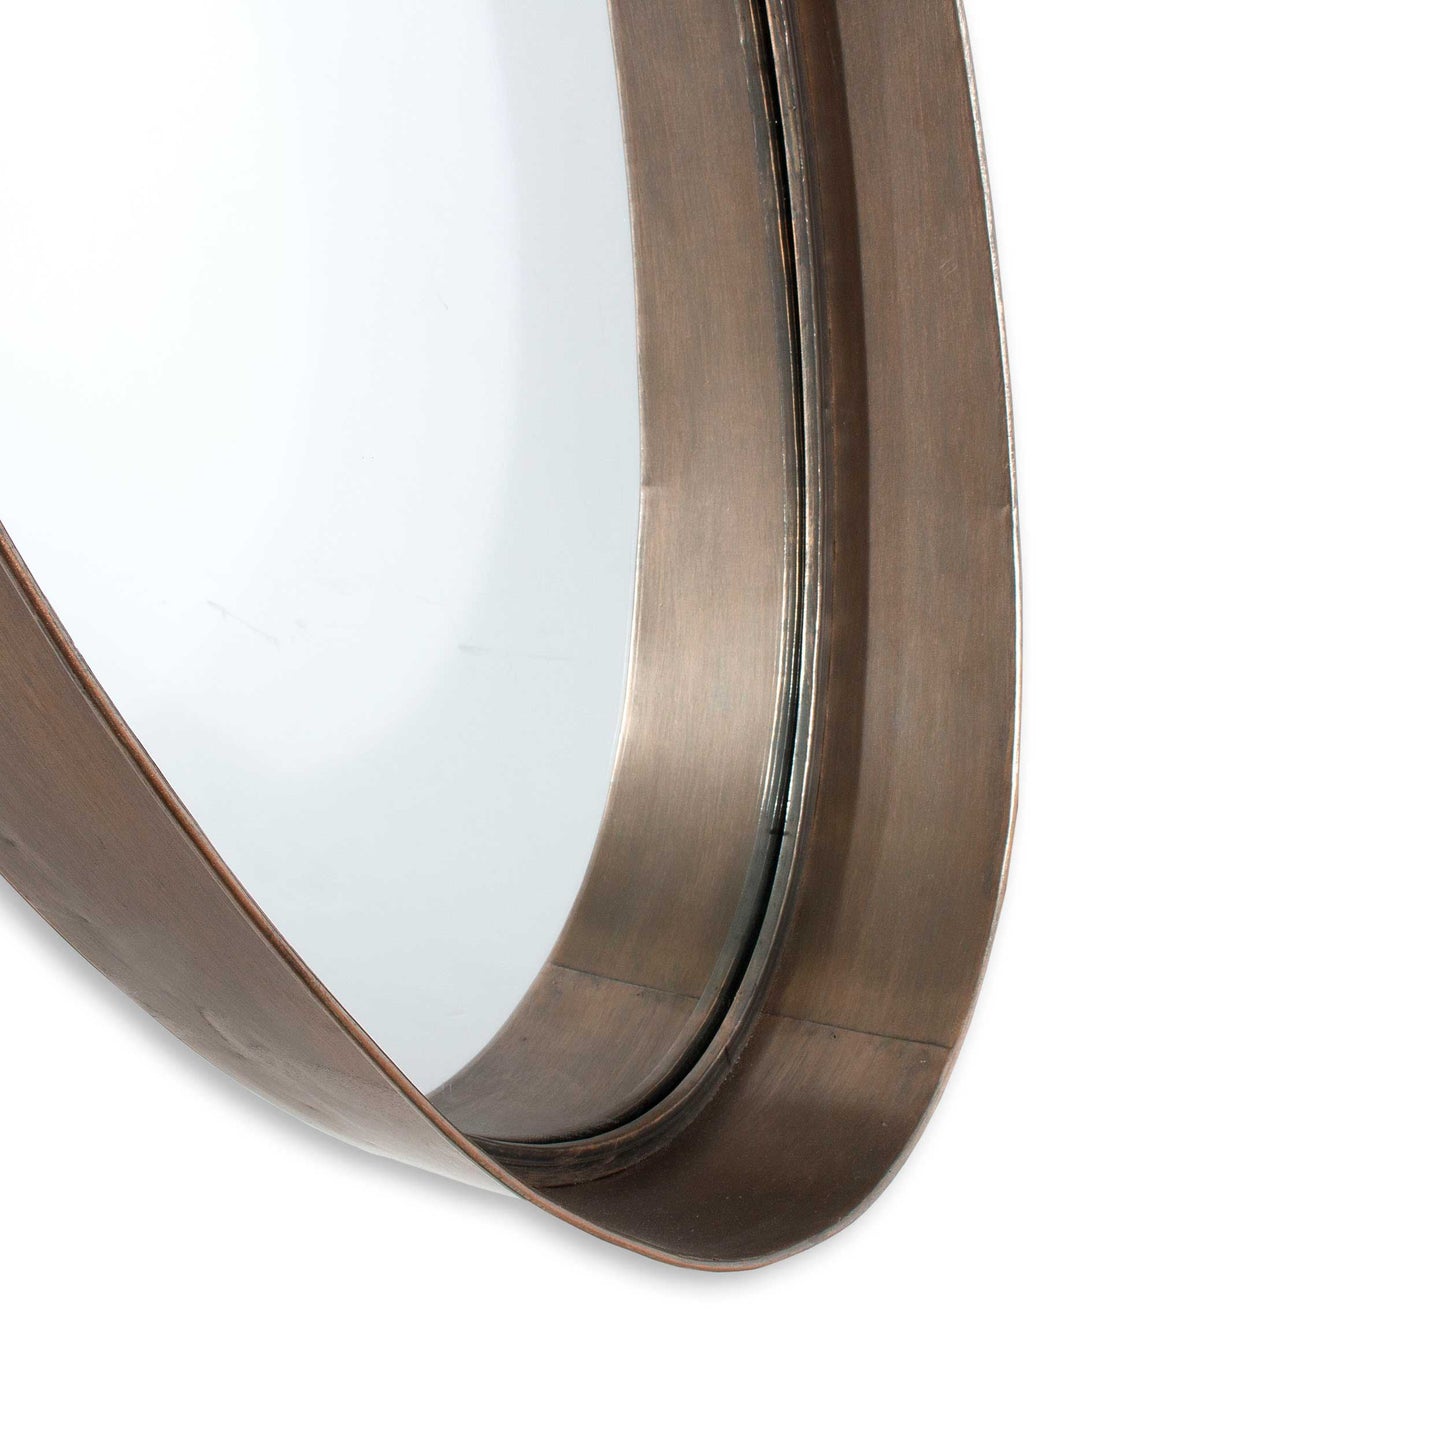 Macklin close-up of the curved, antique bronze frame, highlighting the textured metallic finish and reflective surface.